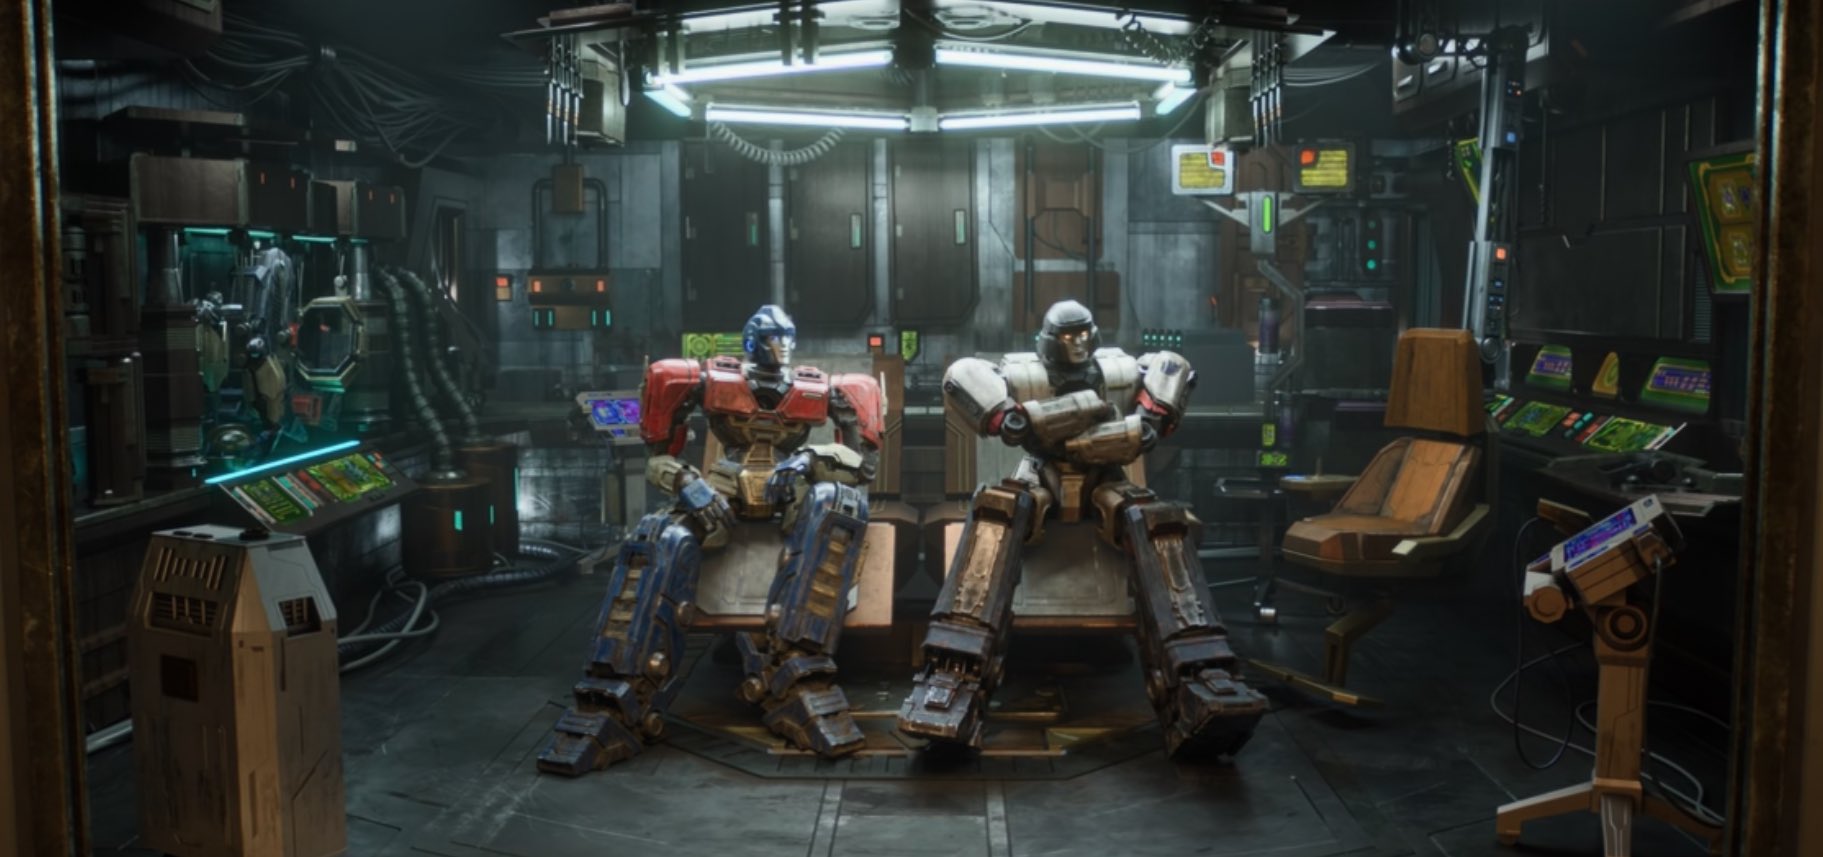 Transformers One Trailer Takes the Optimus Prime Origin Story in a Bizarre Direction